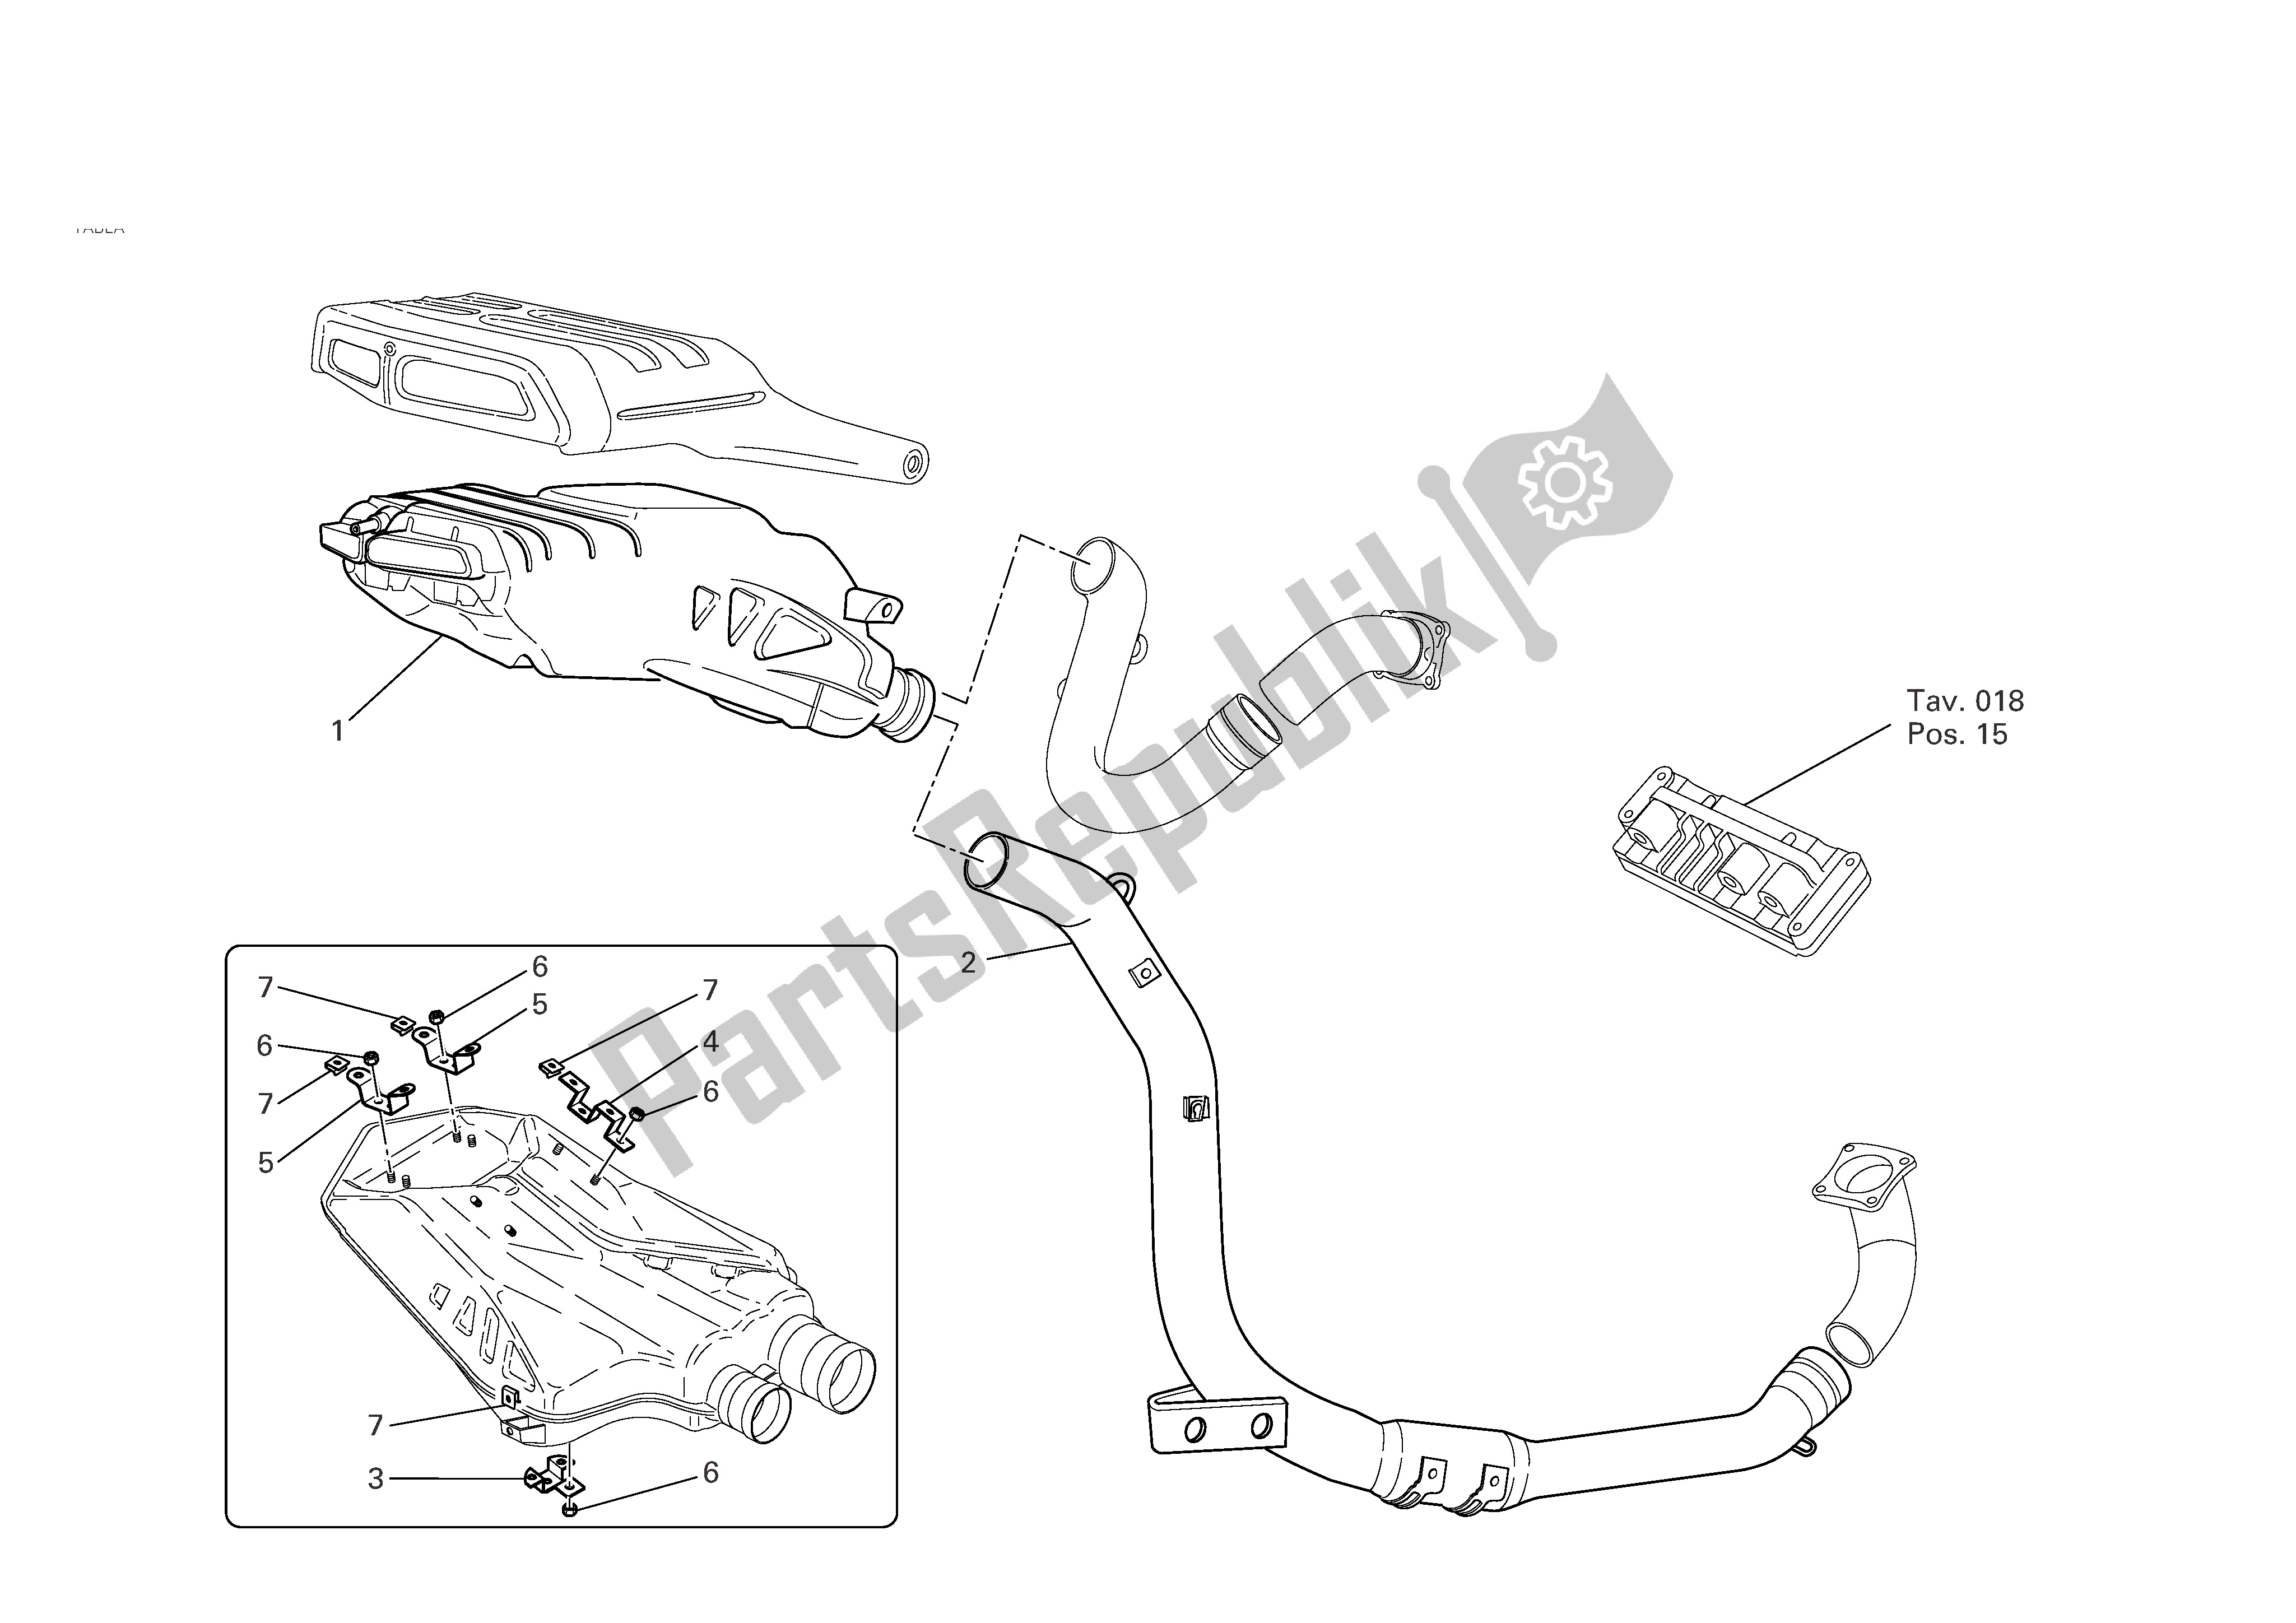 All parts for the Carbon Fibre Exhaustsystem of the Ducati 749R 2004